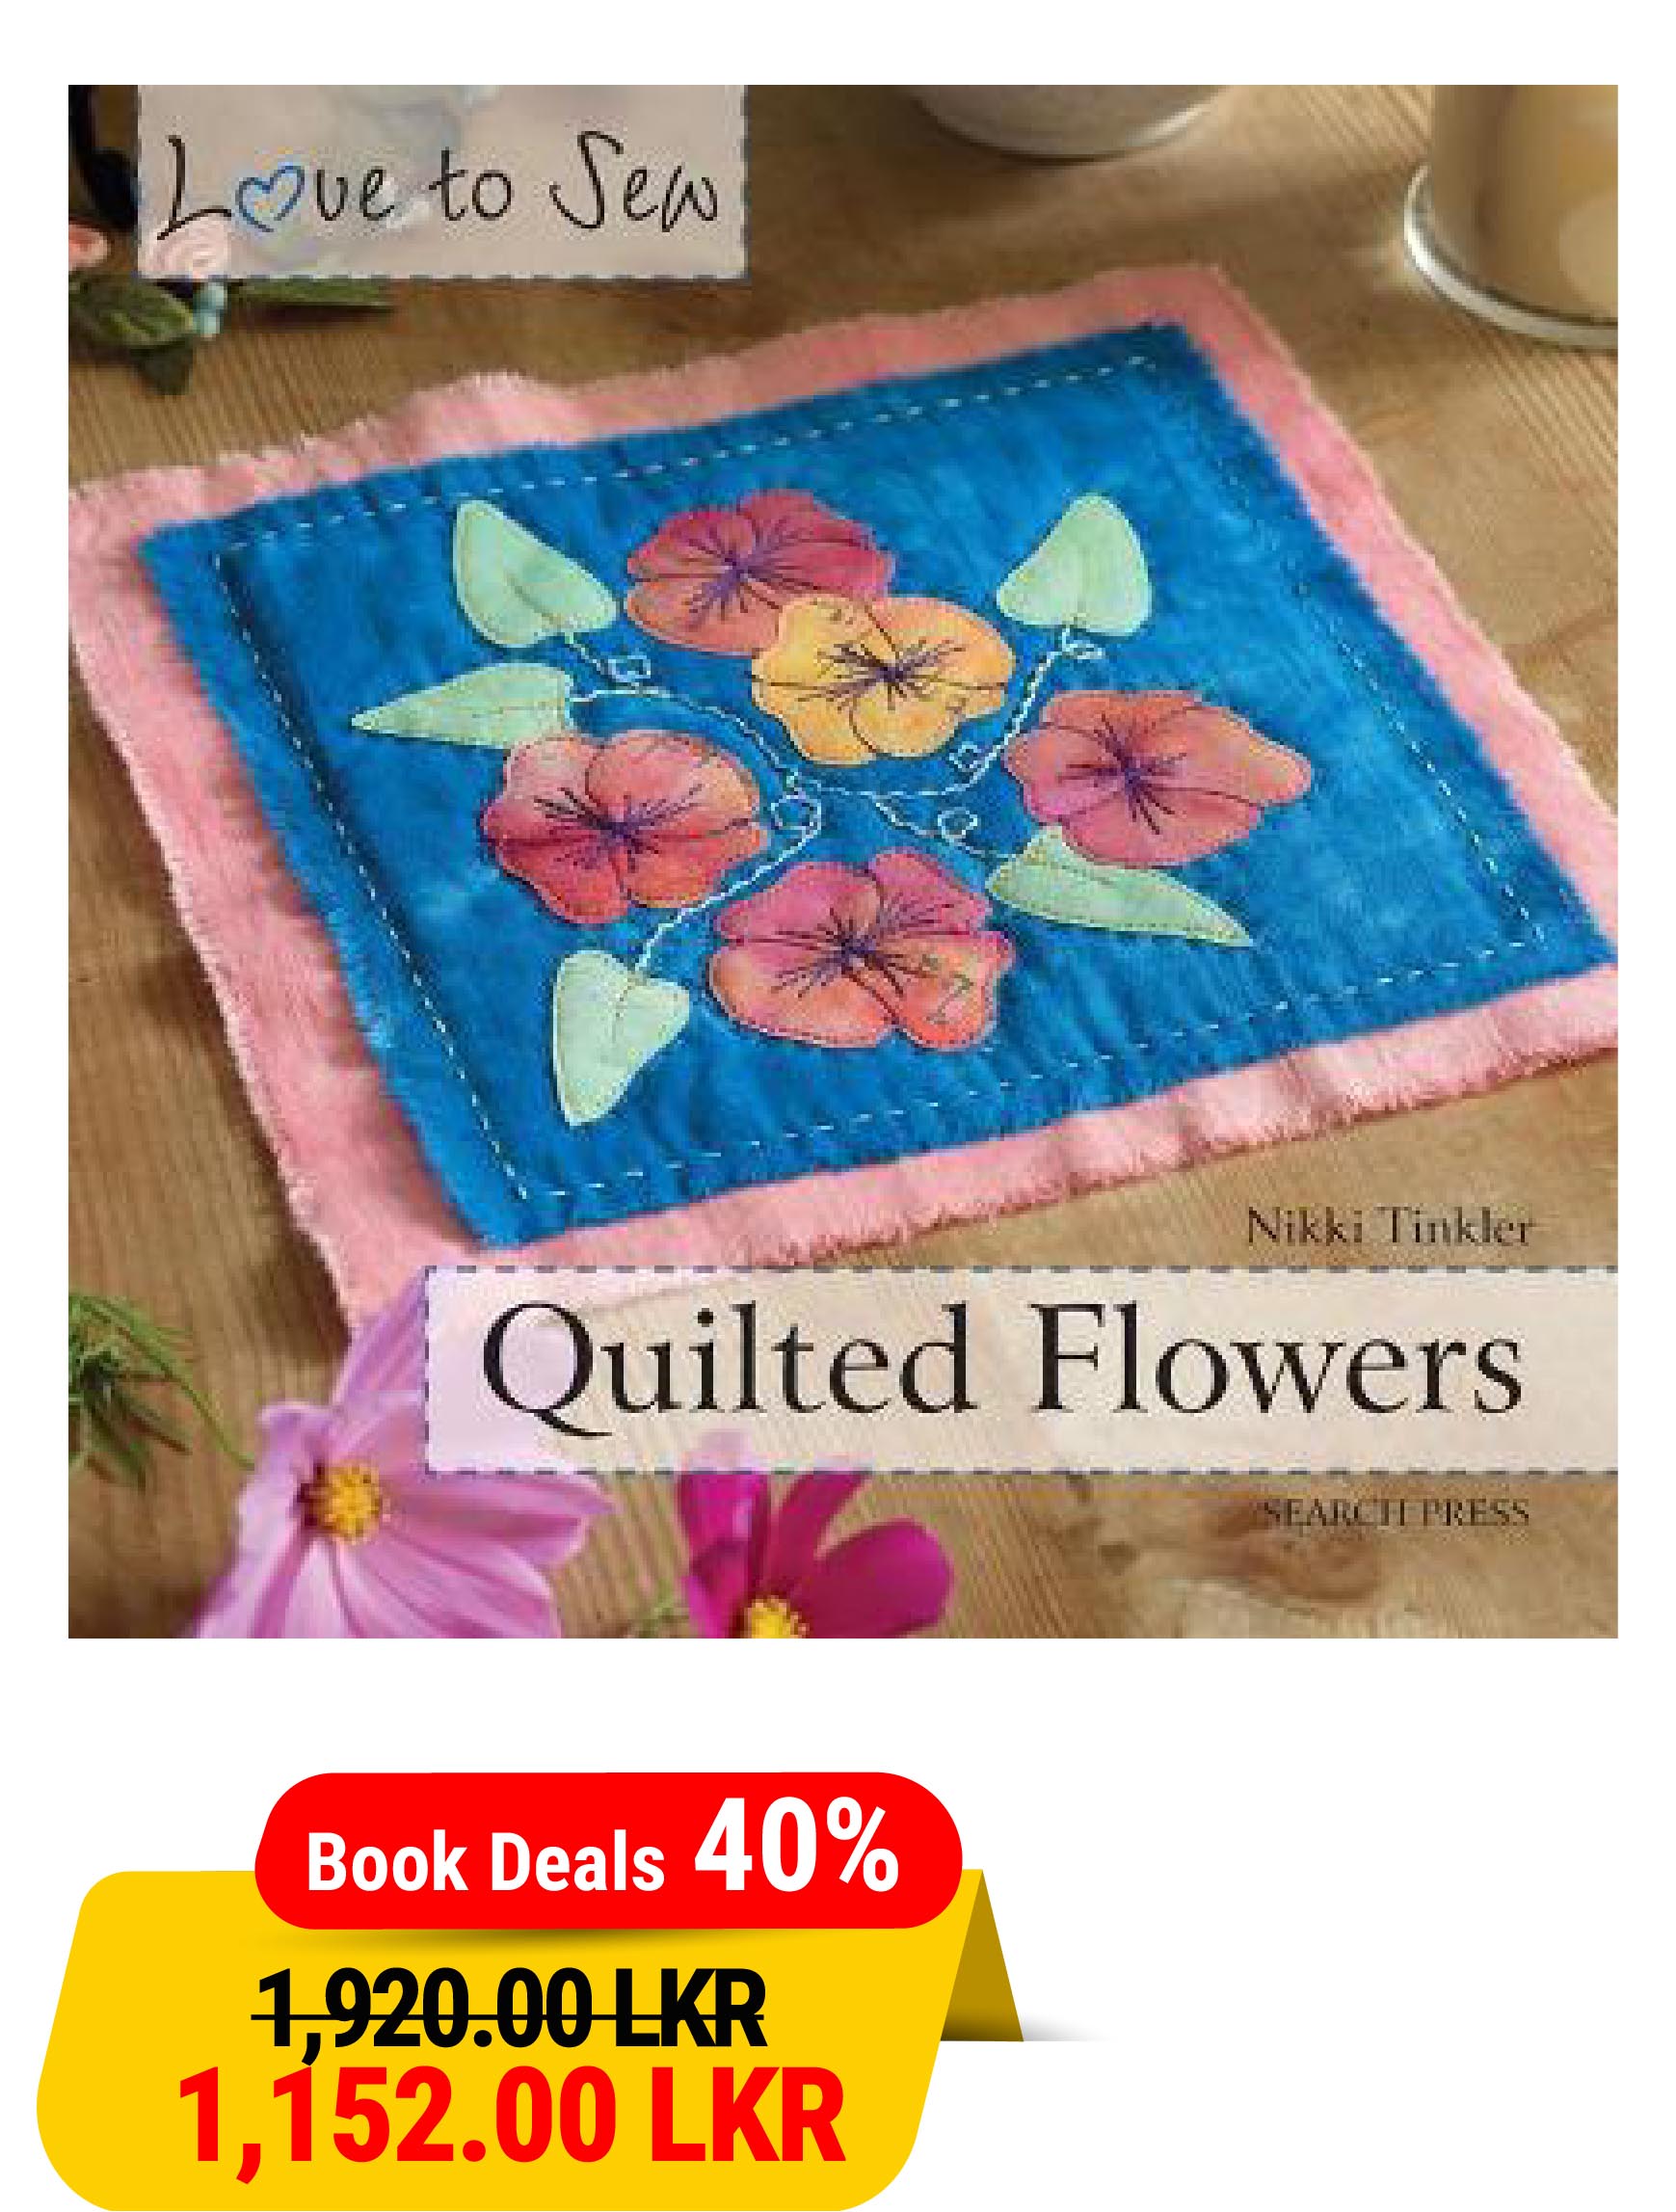 Love to Sew: Quilted Flowers